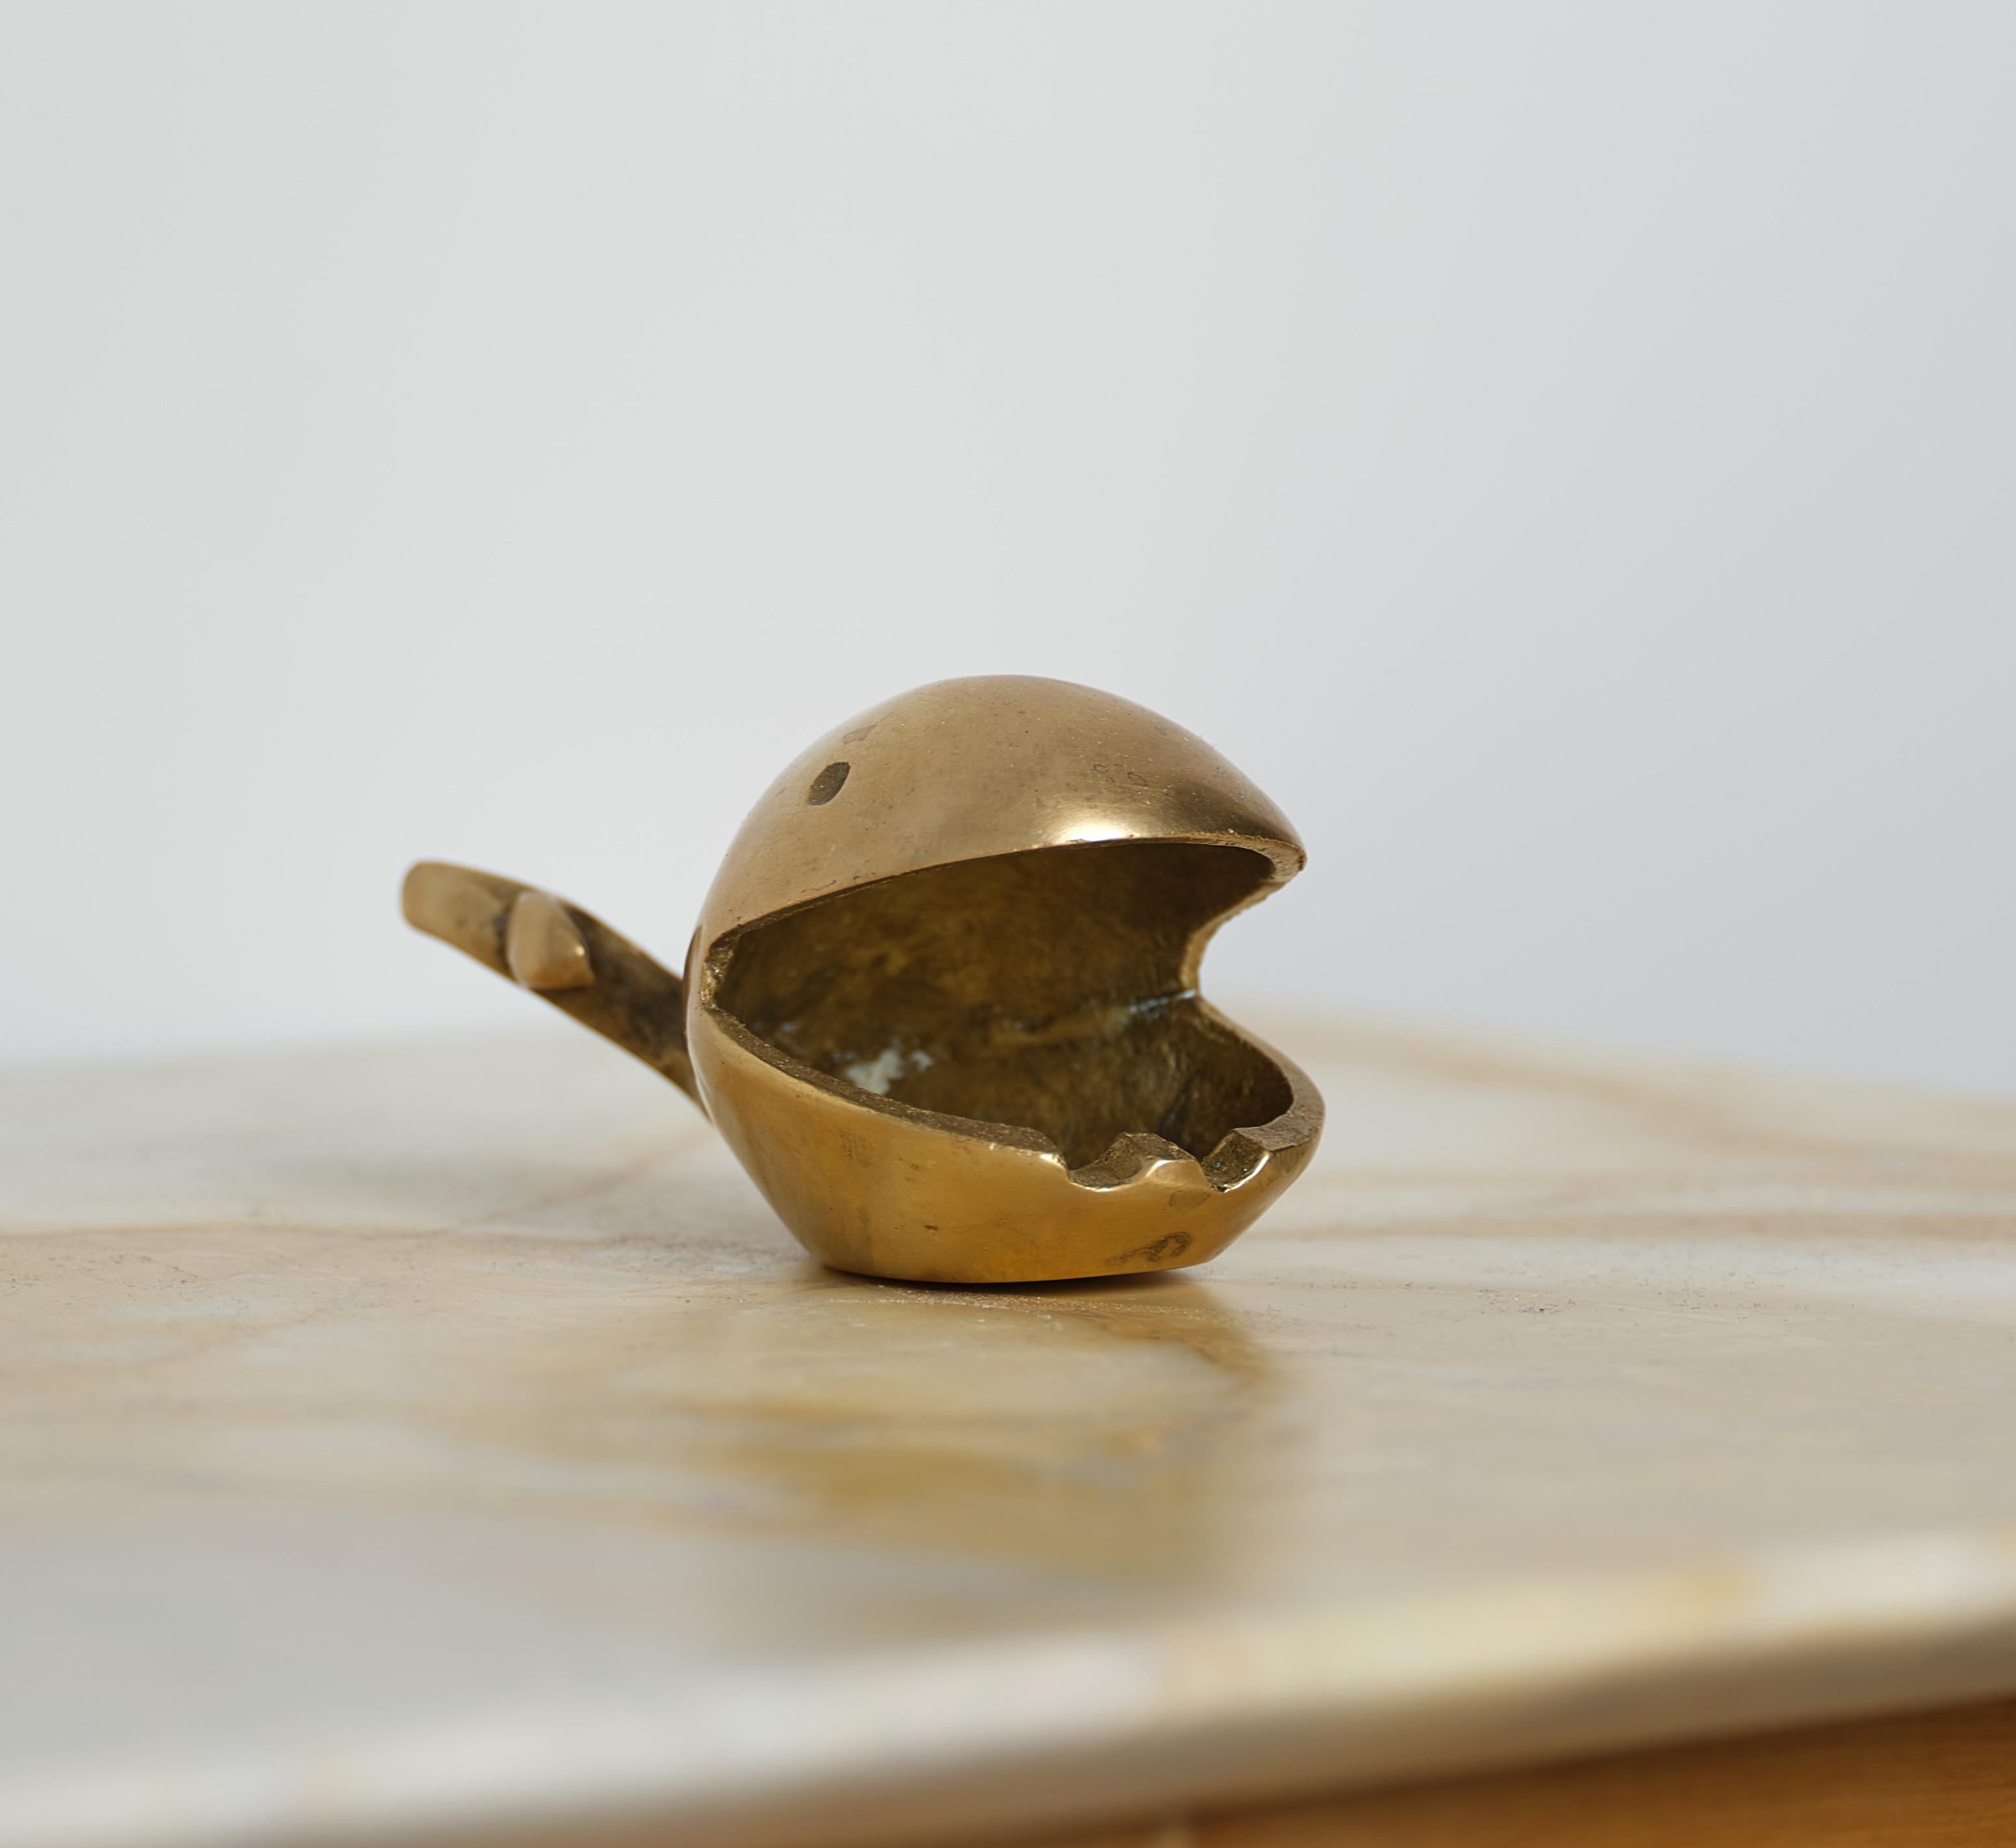  1950s ashtray – a whale-shaped marvel meticulously crafted from brass with a captivating patina. This Italian-designed and produced  not only embodies the essence of mid-century elegance but also serves as a versatile fermacarte (paperweight). The